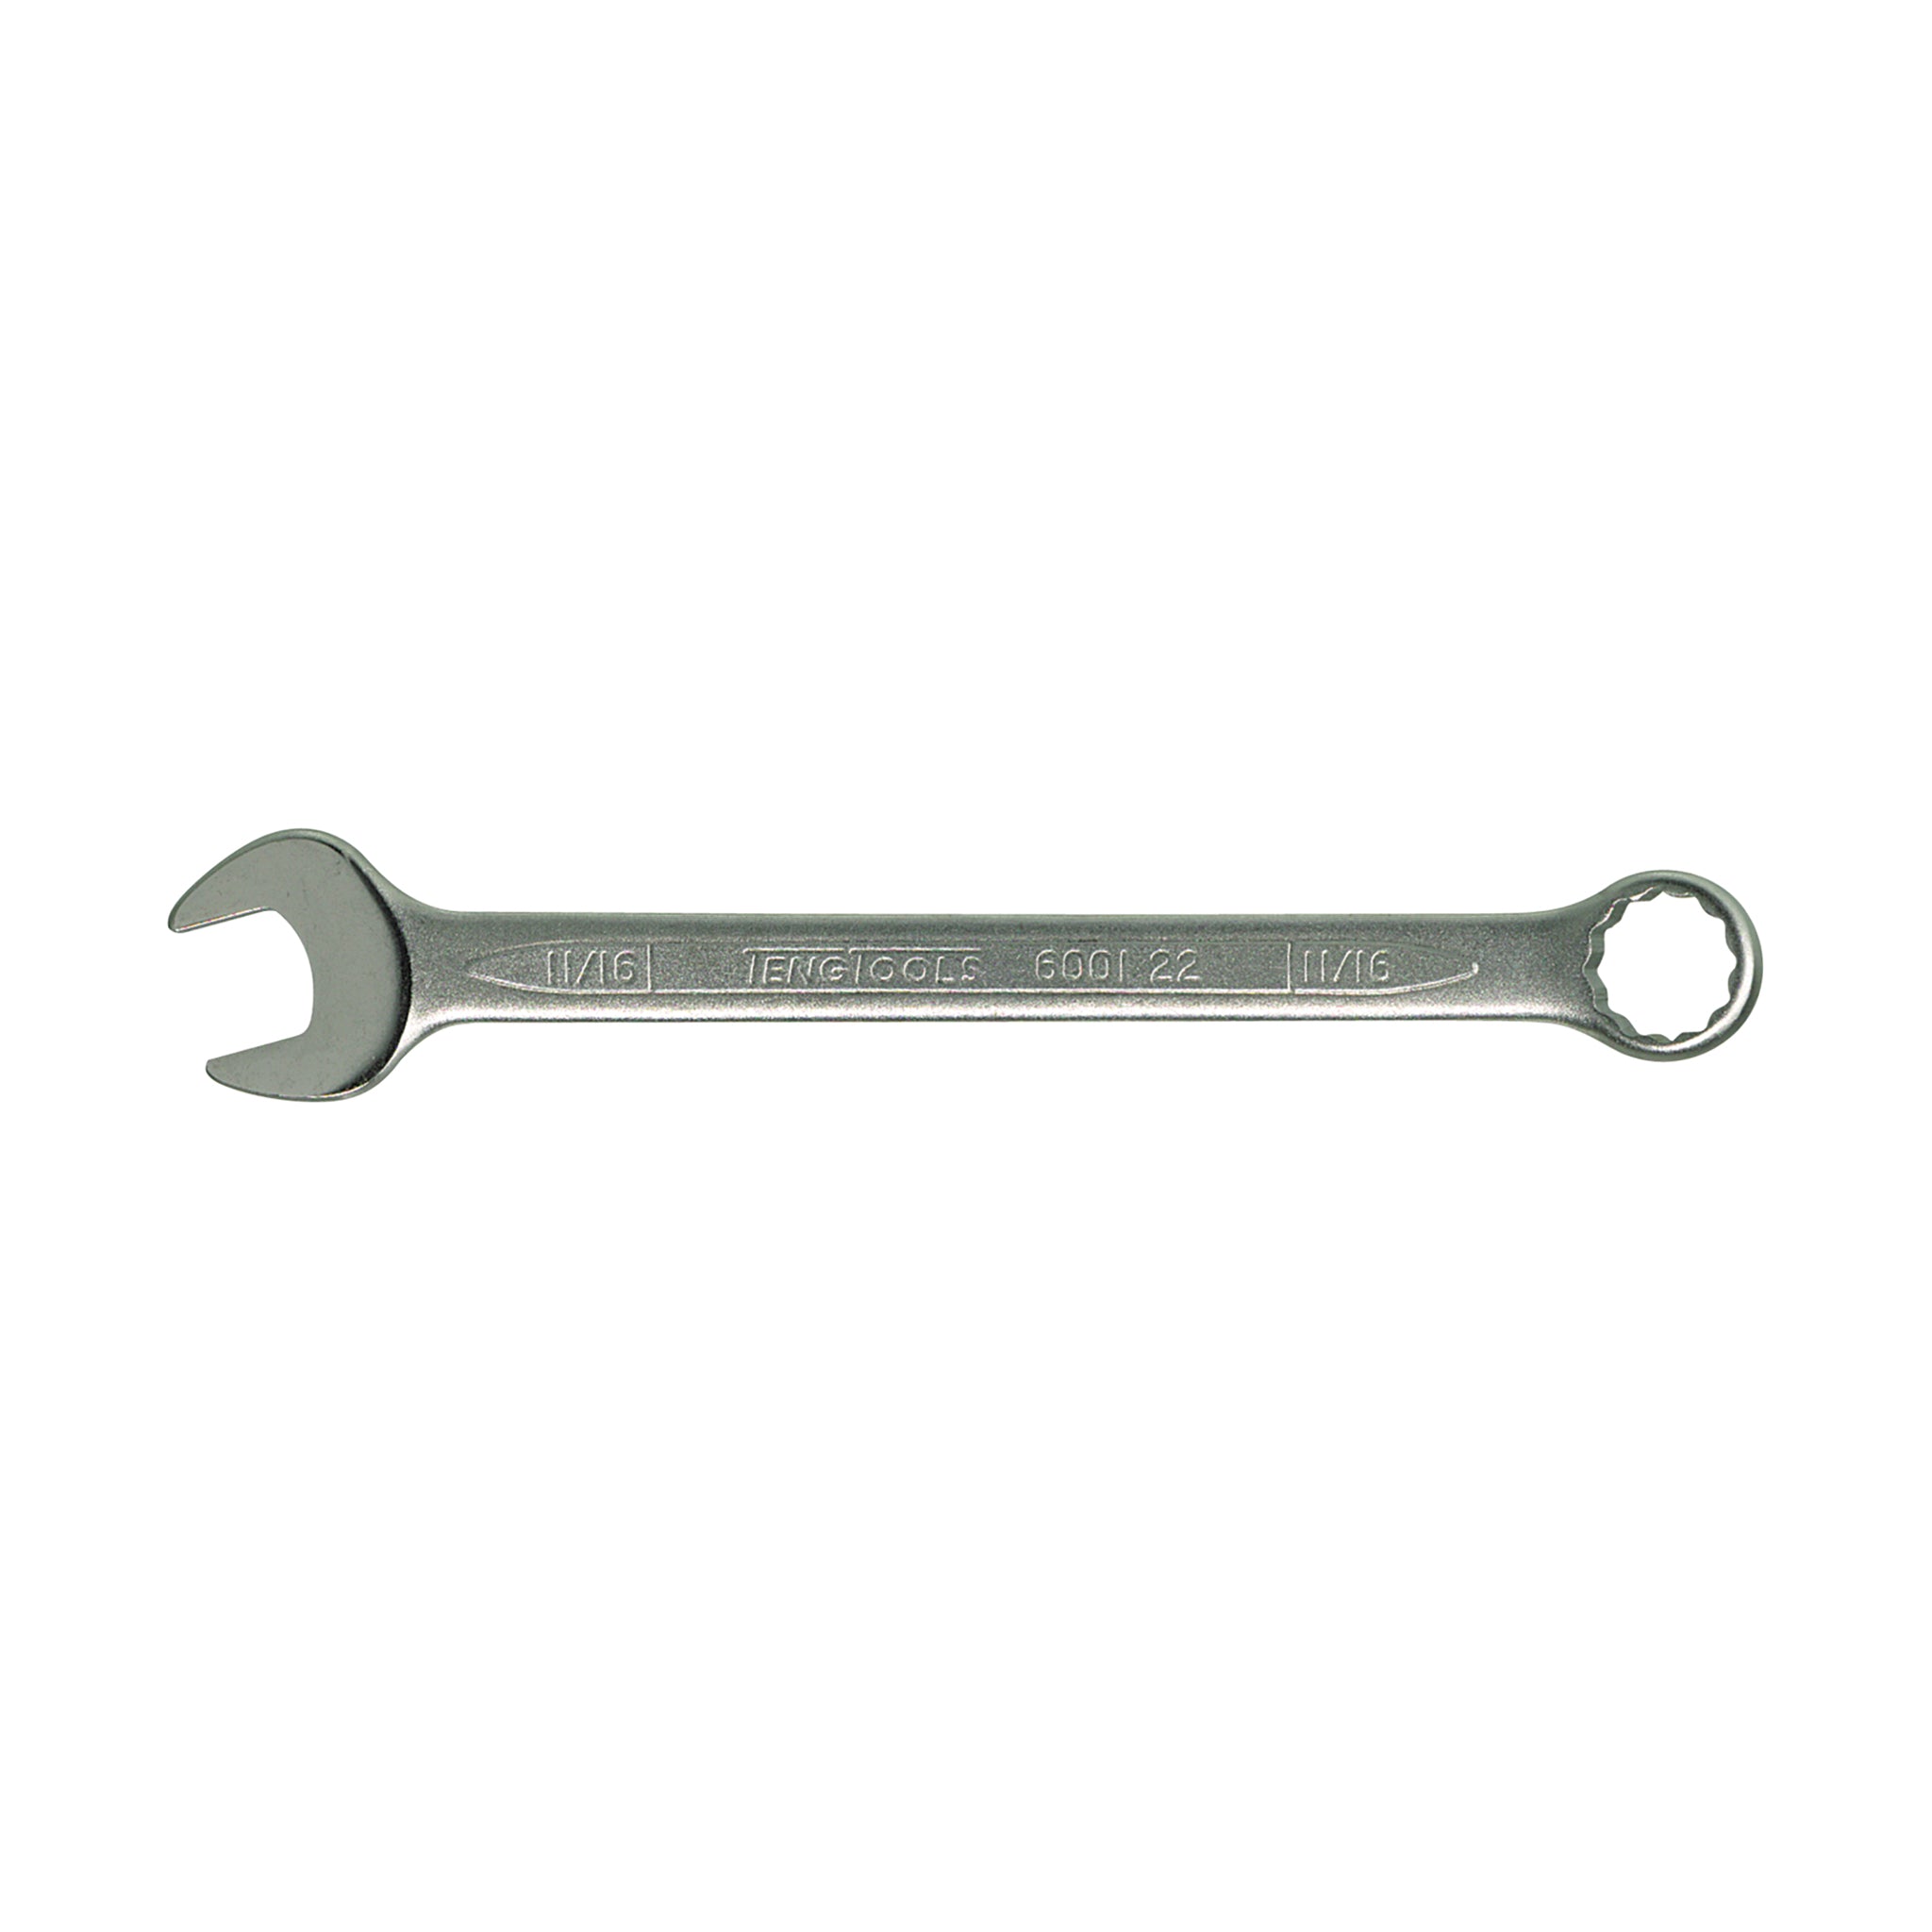 Standard Combination SAE Wrenches Made With Chrome Vanadium Steel - 9/16